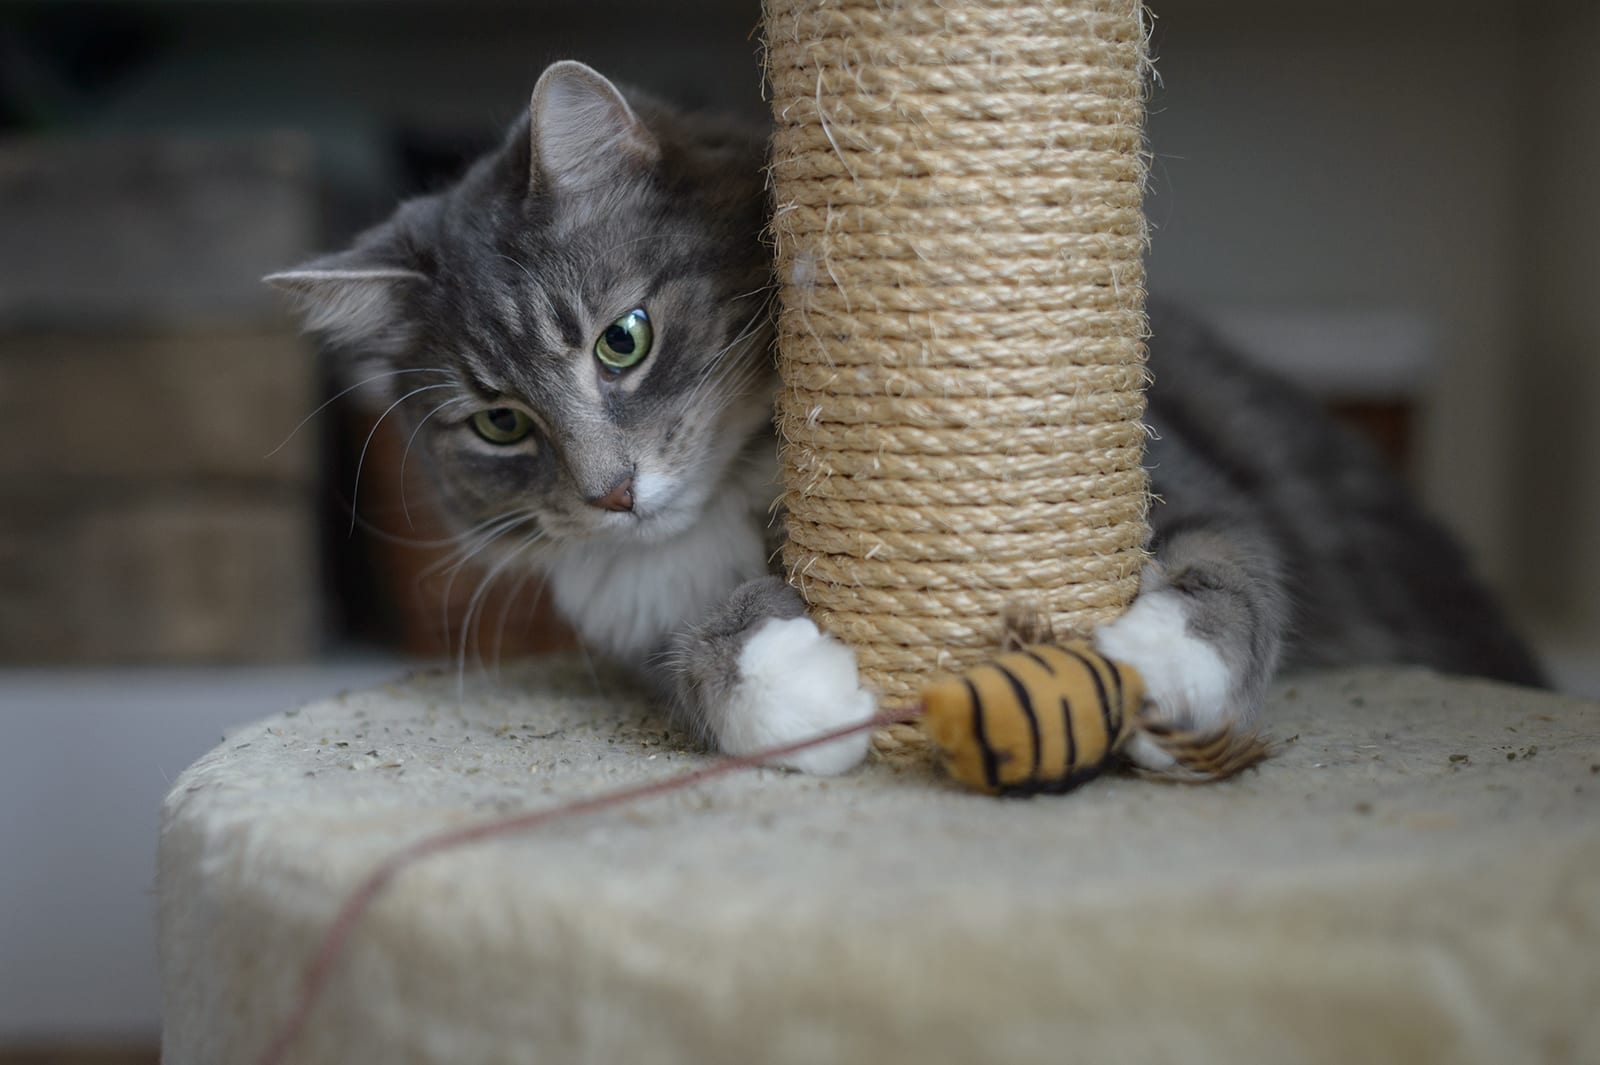 Cat using scratching post and playing with a mouse toy